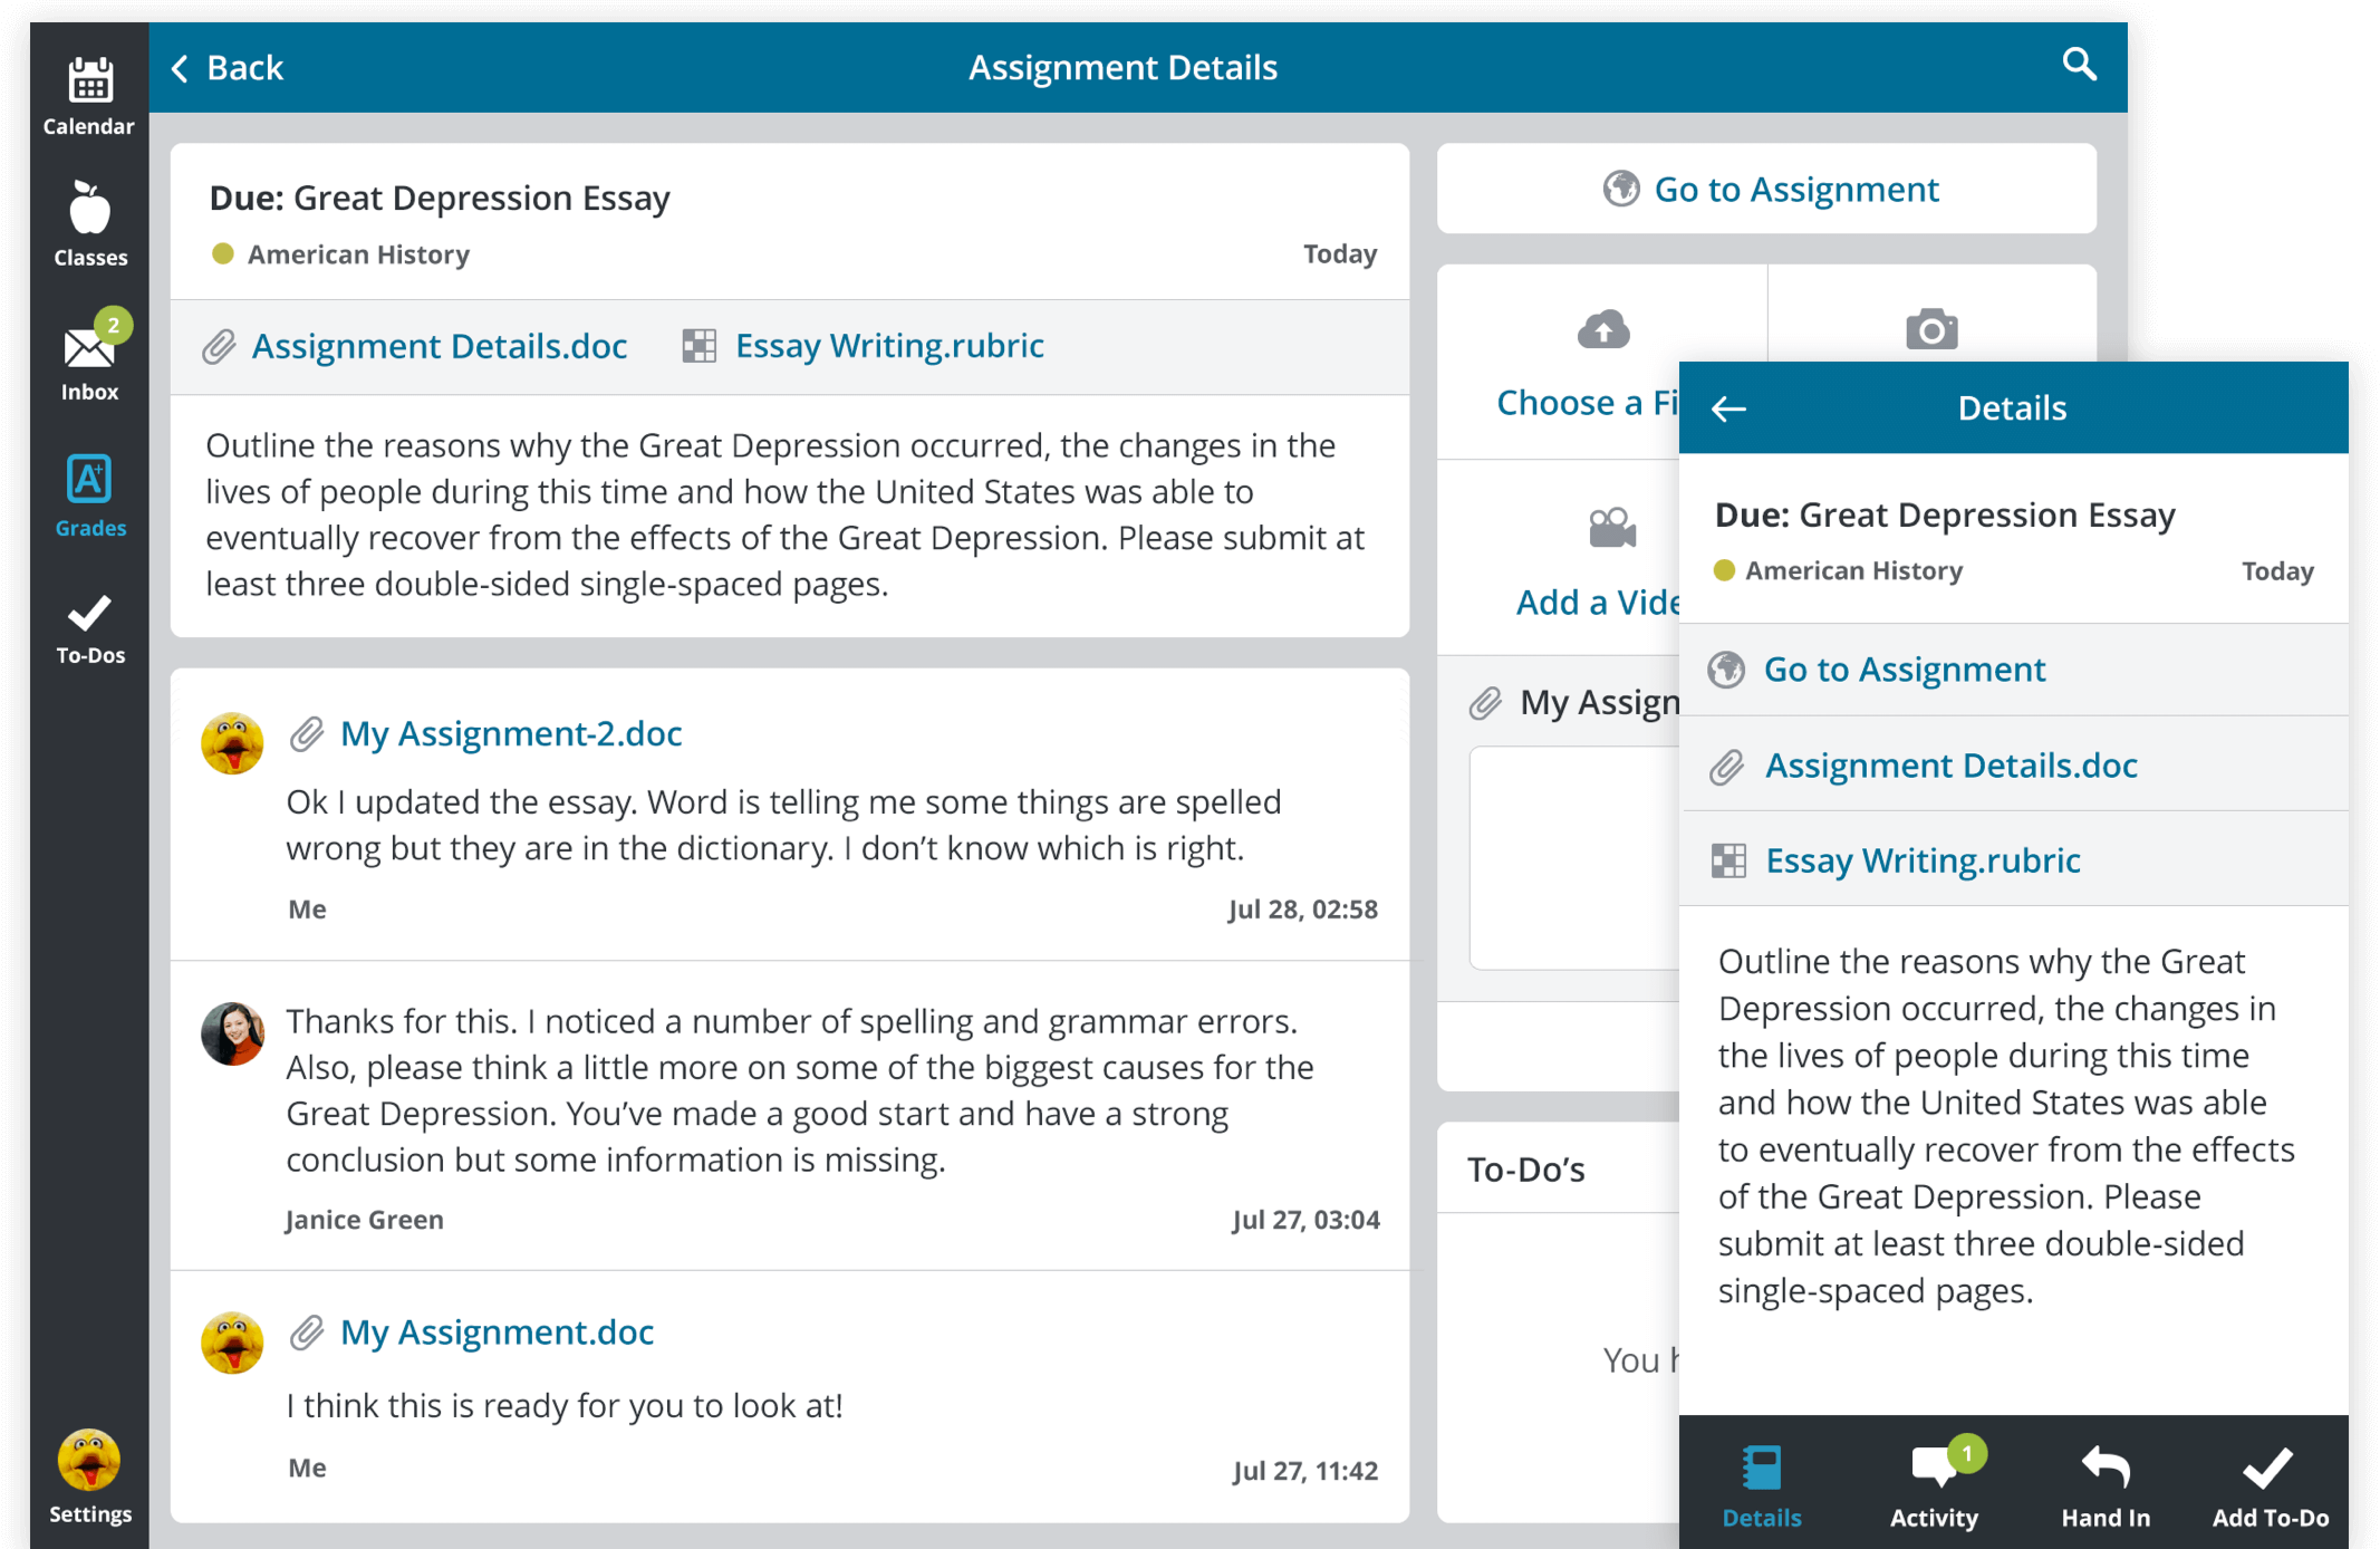 Screenshots of homework assignments on mobile apps for an elearning platform